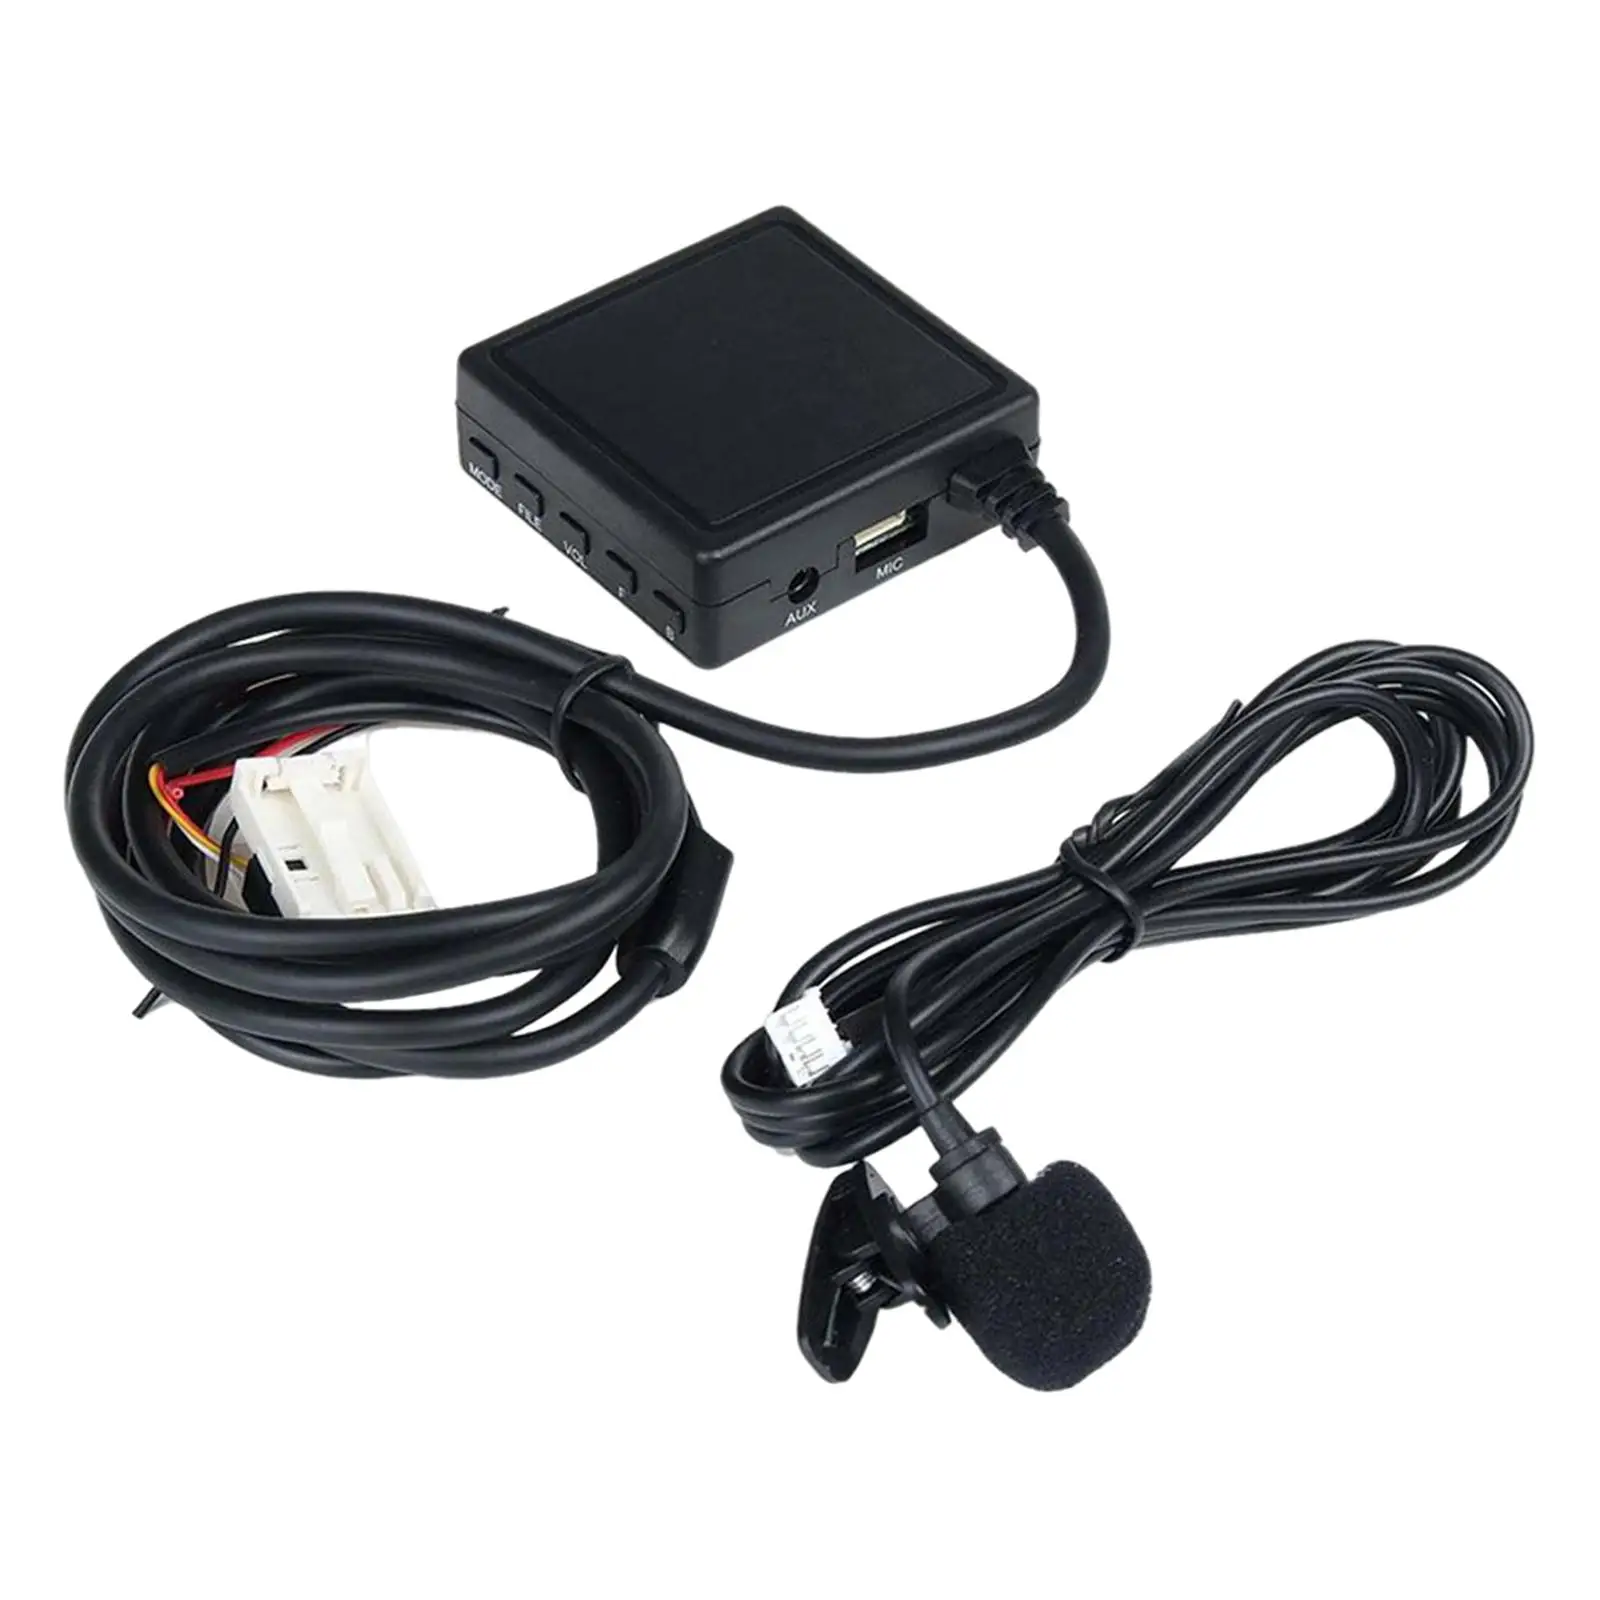 Auxiliary Audio Converter with Microphone Accessories Support Handsfree Call AUX Cable Adapter for E91 E92 E60 E90